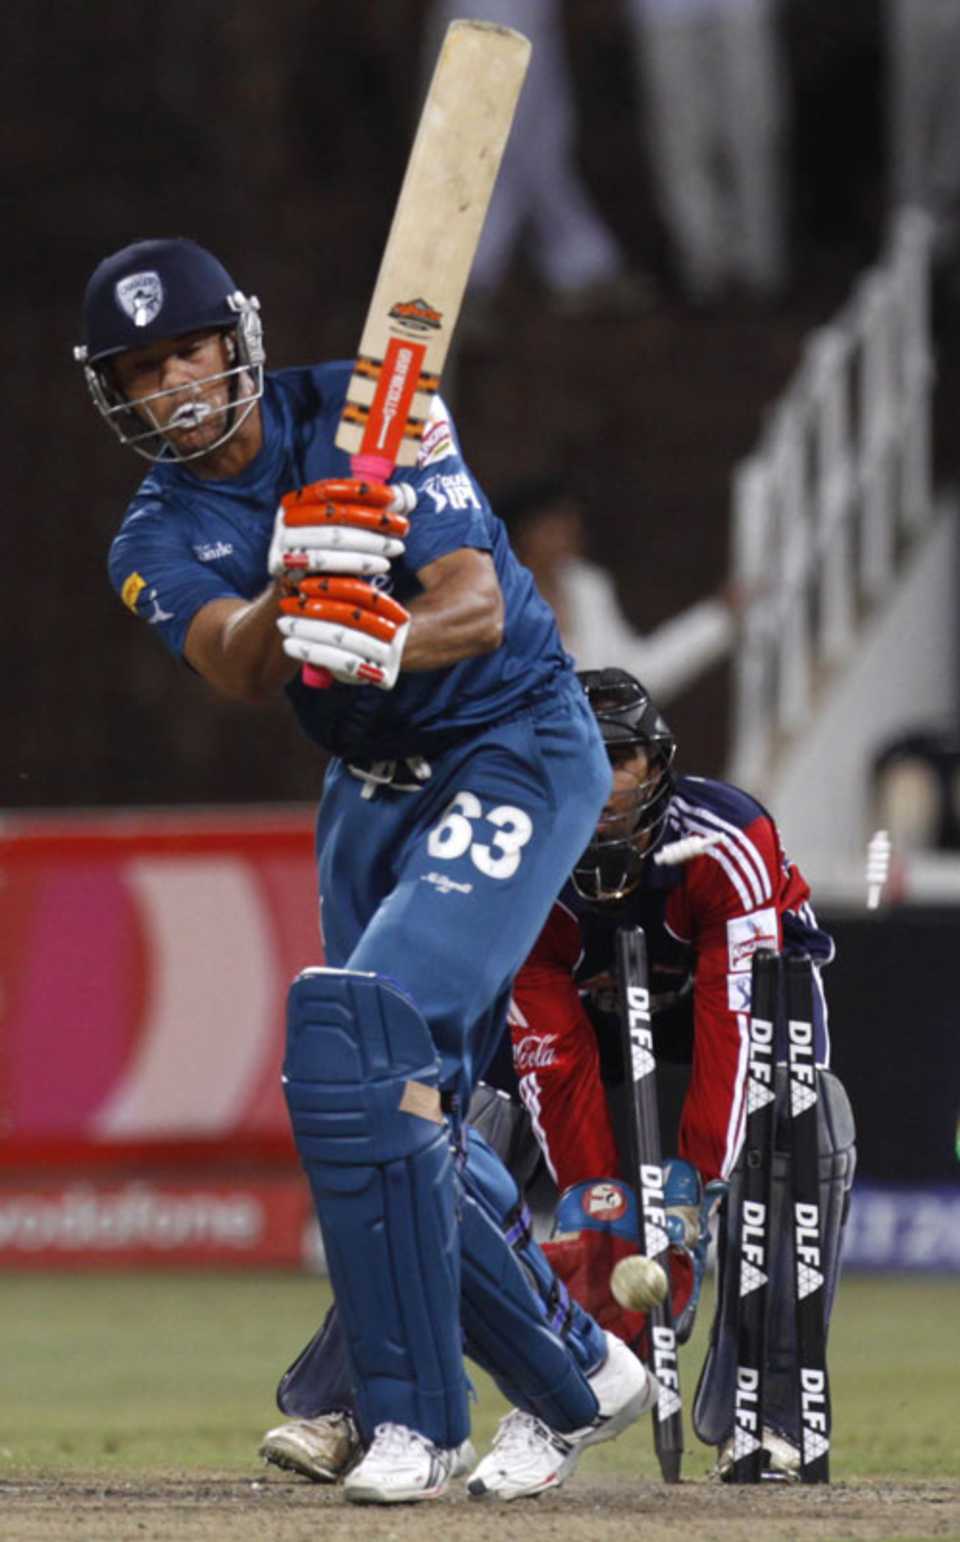 Andrew Symonds is bowled by a slower one, Deccan Chargers v Delhi Daredevils, IPL, Durban, May 13, 2009